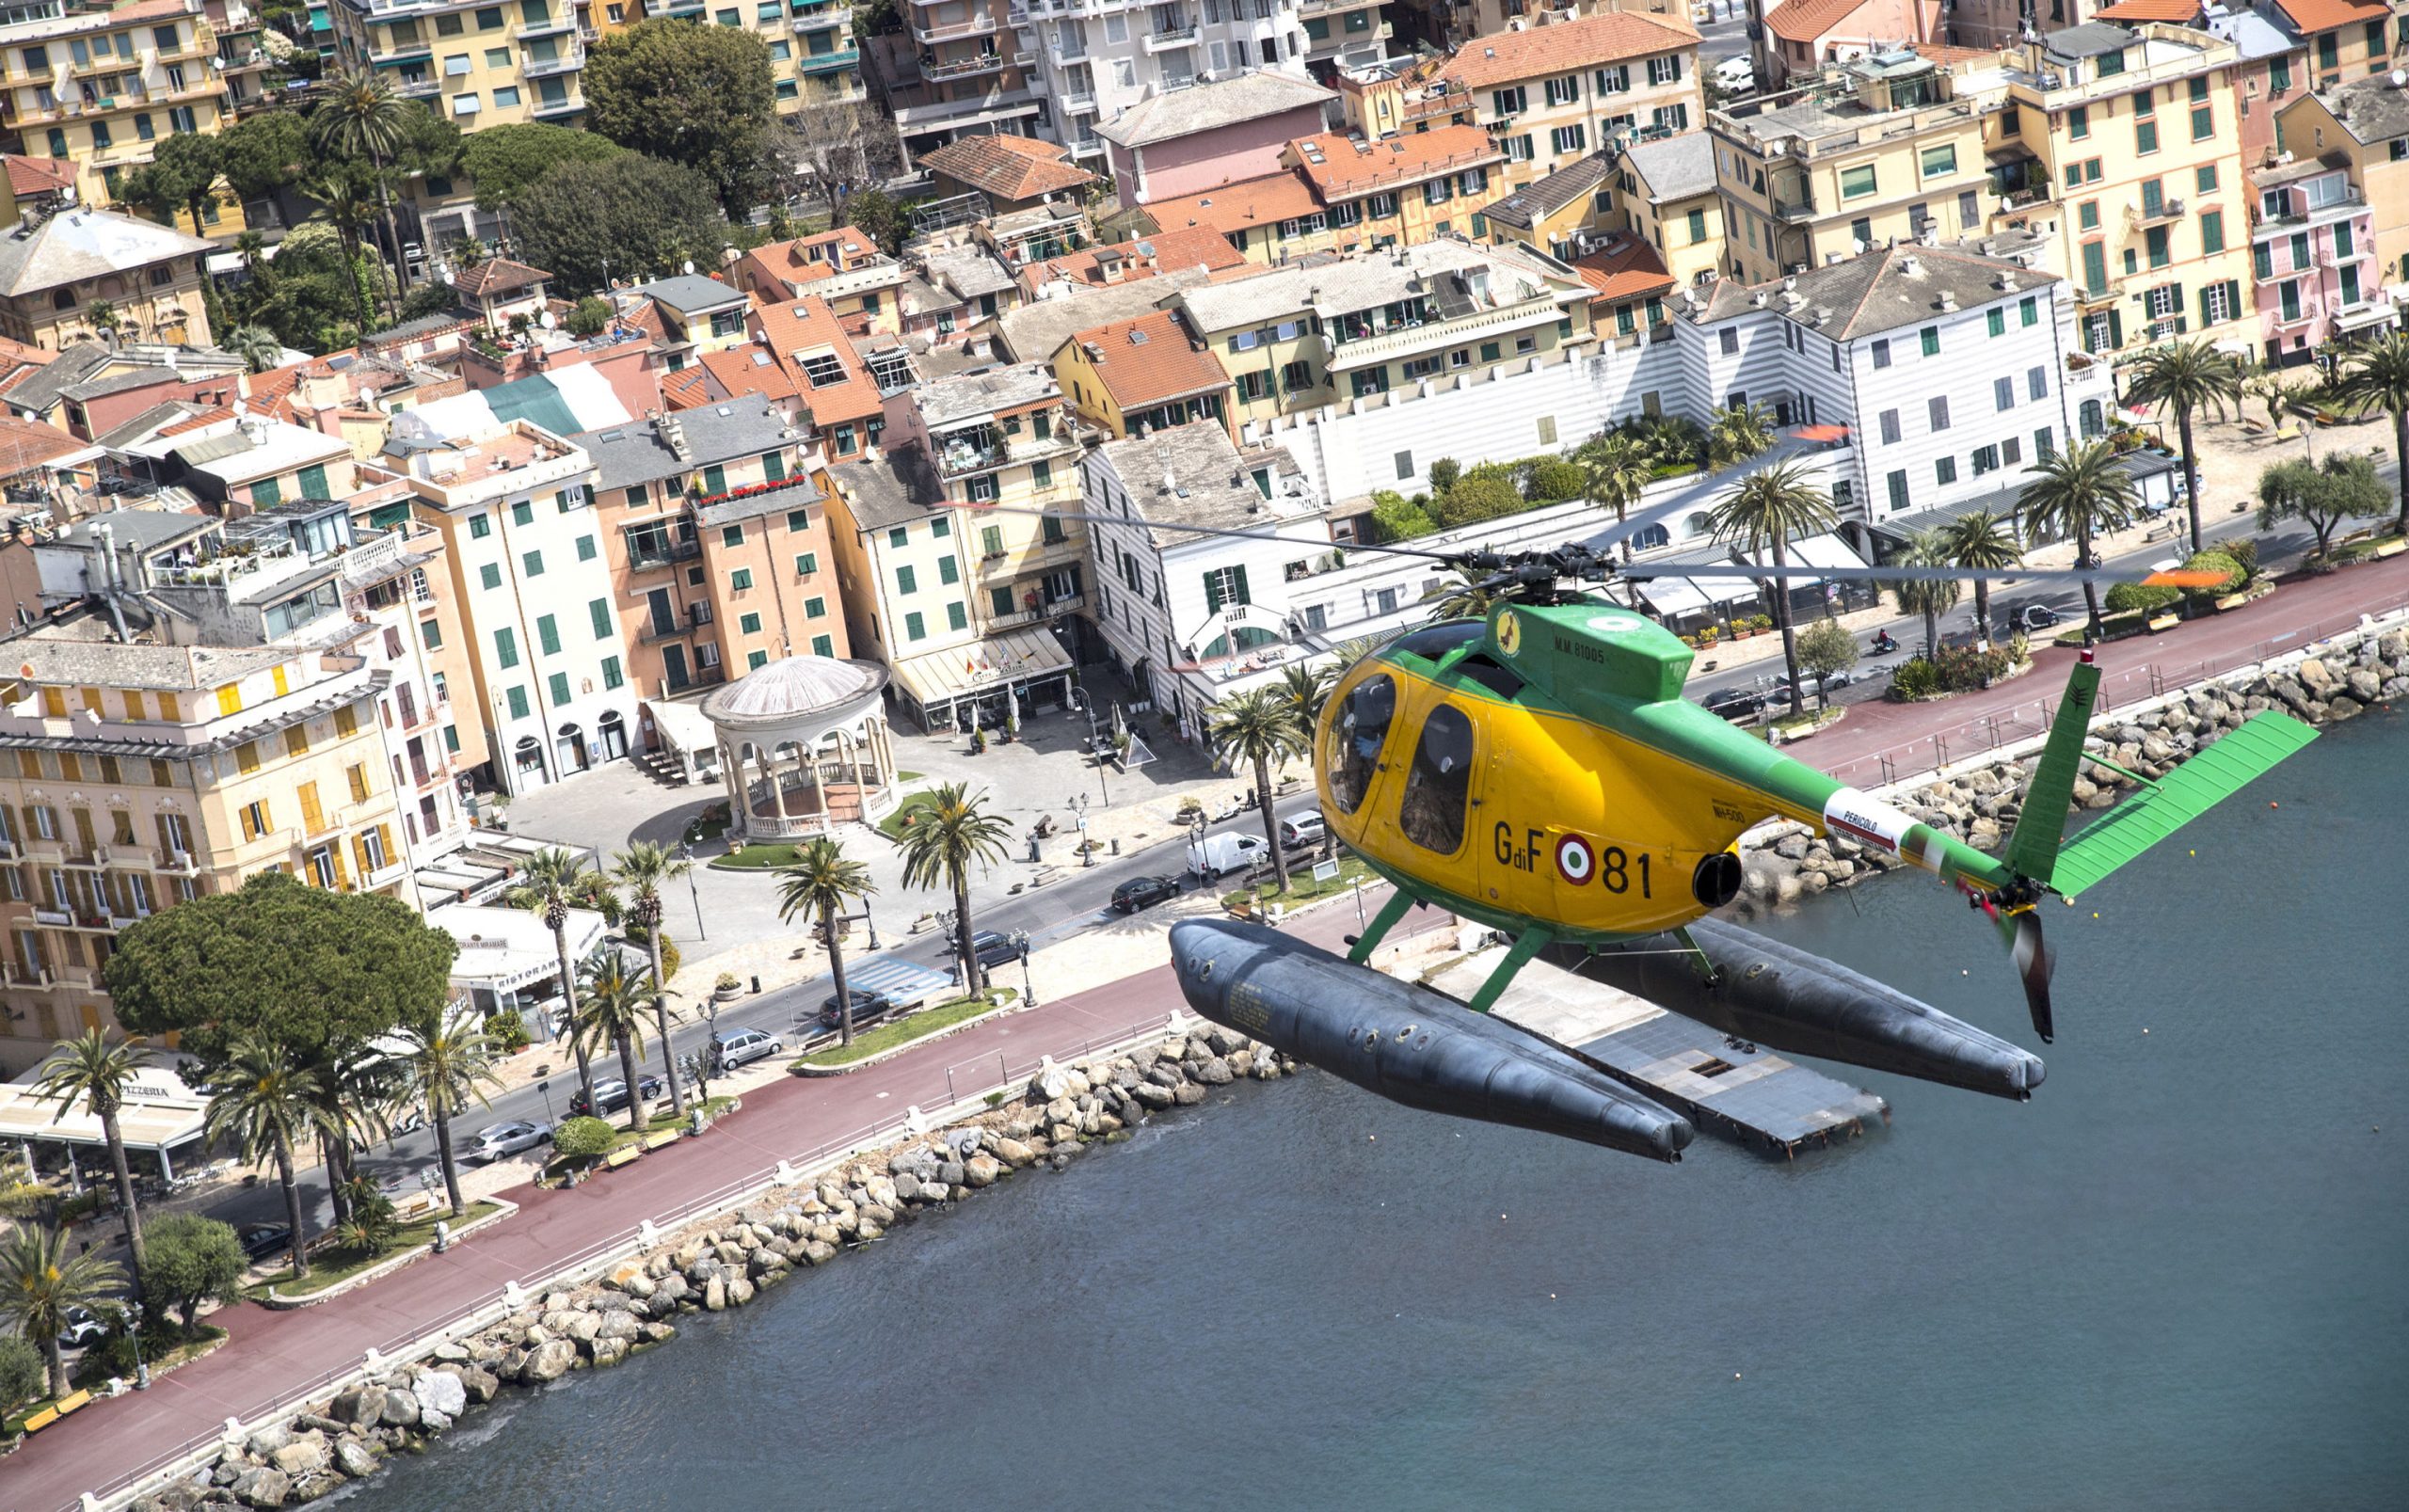 epa08370253 An aerial view shows a Guardia di Finanza (GdF, Economic and Financial Police) helicopter during a patrolling flight of the Ligurian Riviera, in Genoa, northern Italy, 18 April 2020, during a nationwide lockdown over the coronavirus disease (COVID-19) pandemic. Countries around the world are taking increased measures to stem the widespread of the SARS-CoV-2 coronavirus which causes the COVID-19 disease.  EPA/LUCA ZENNARO